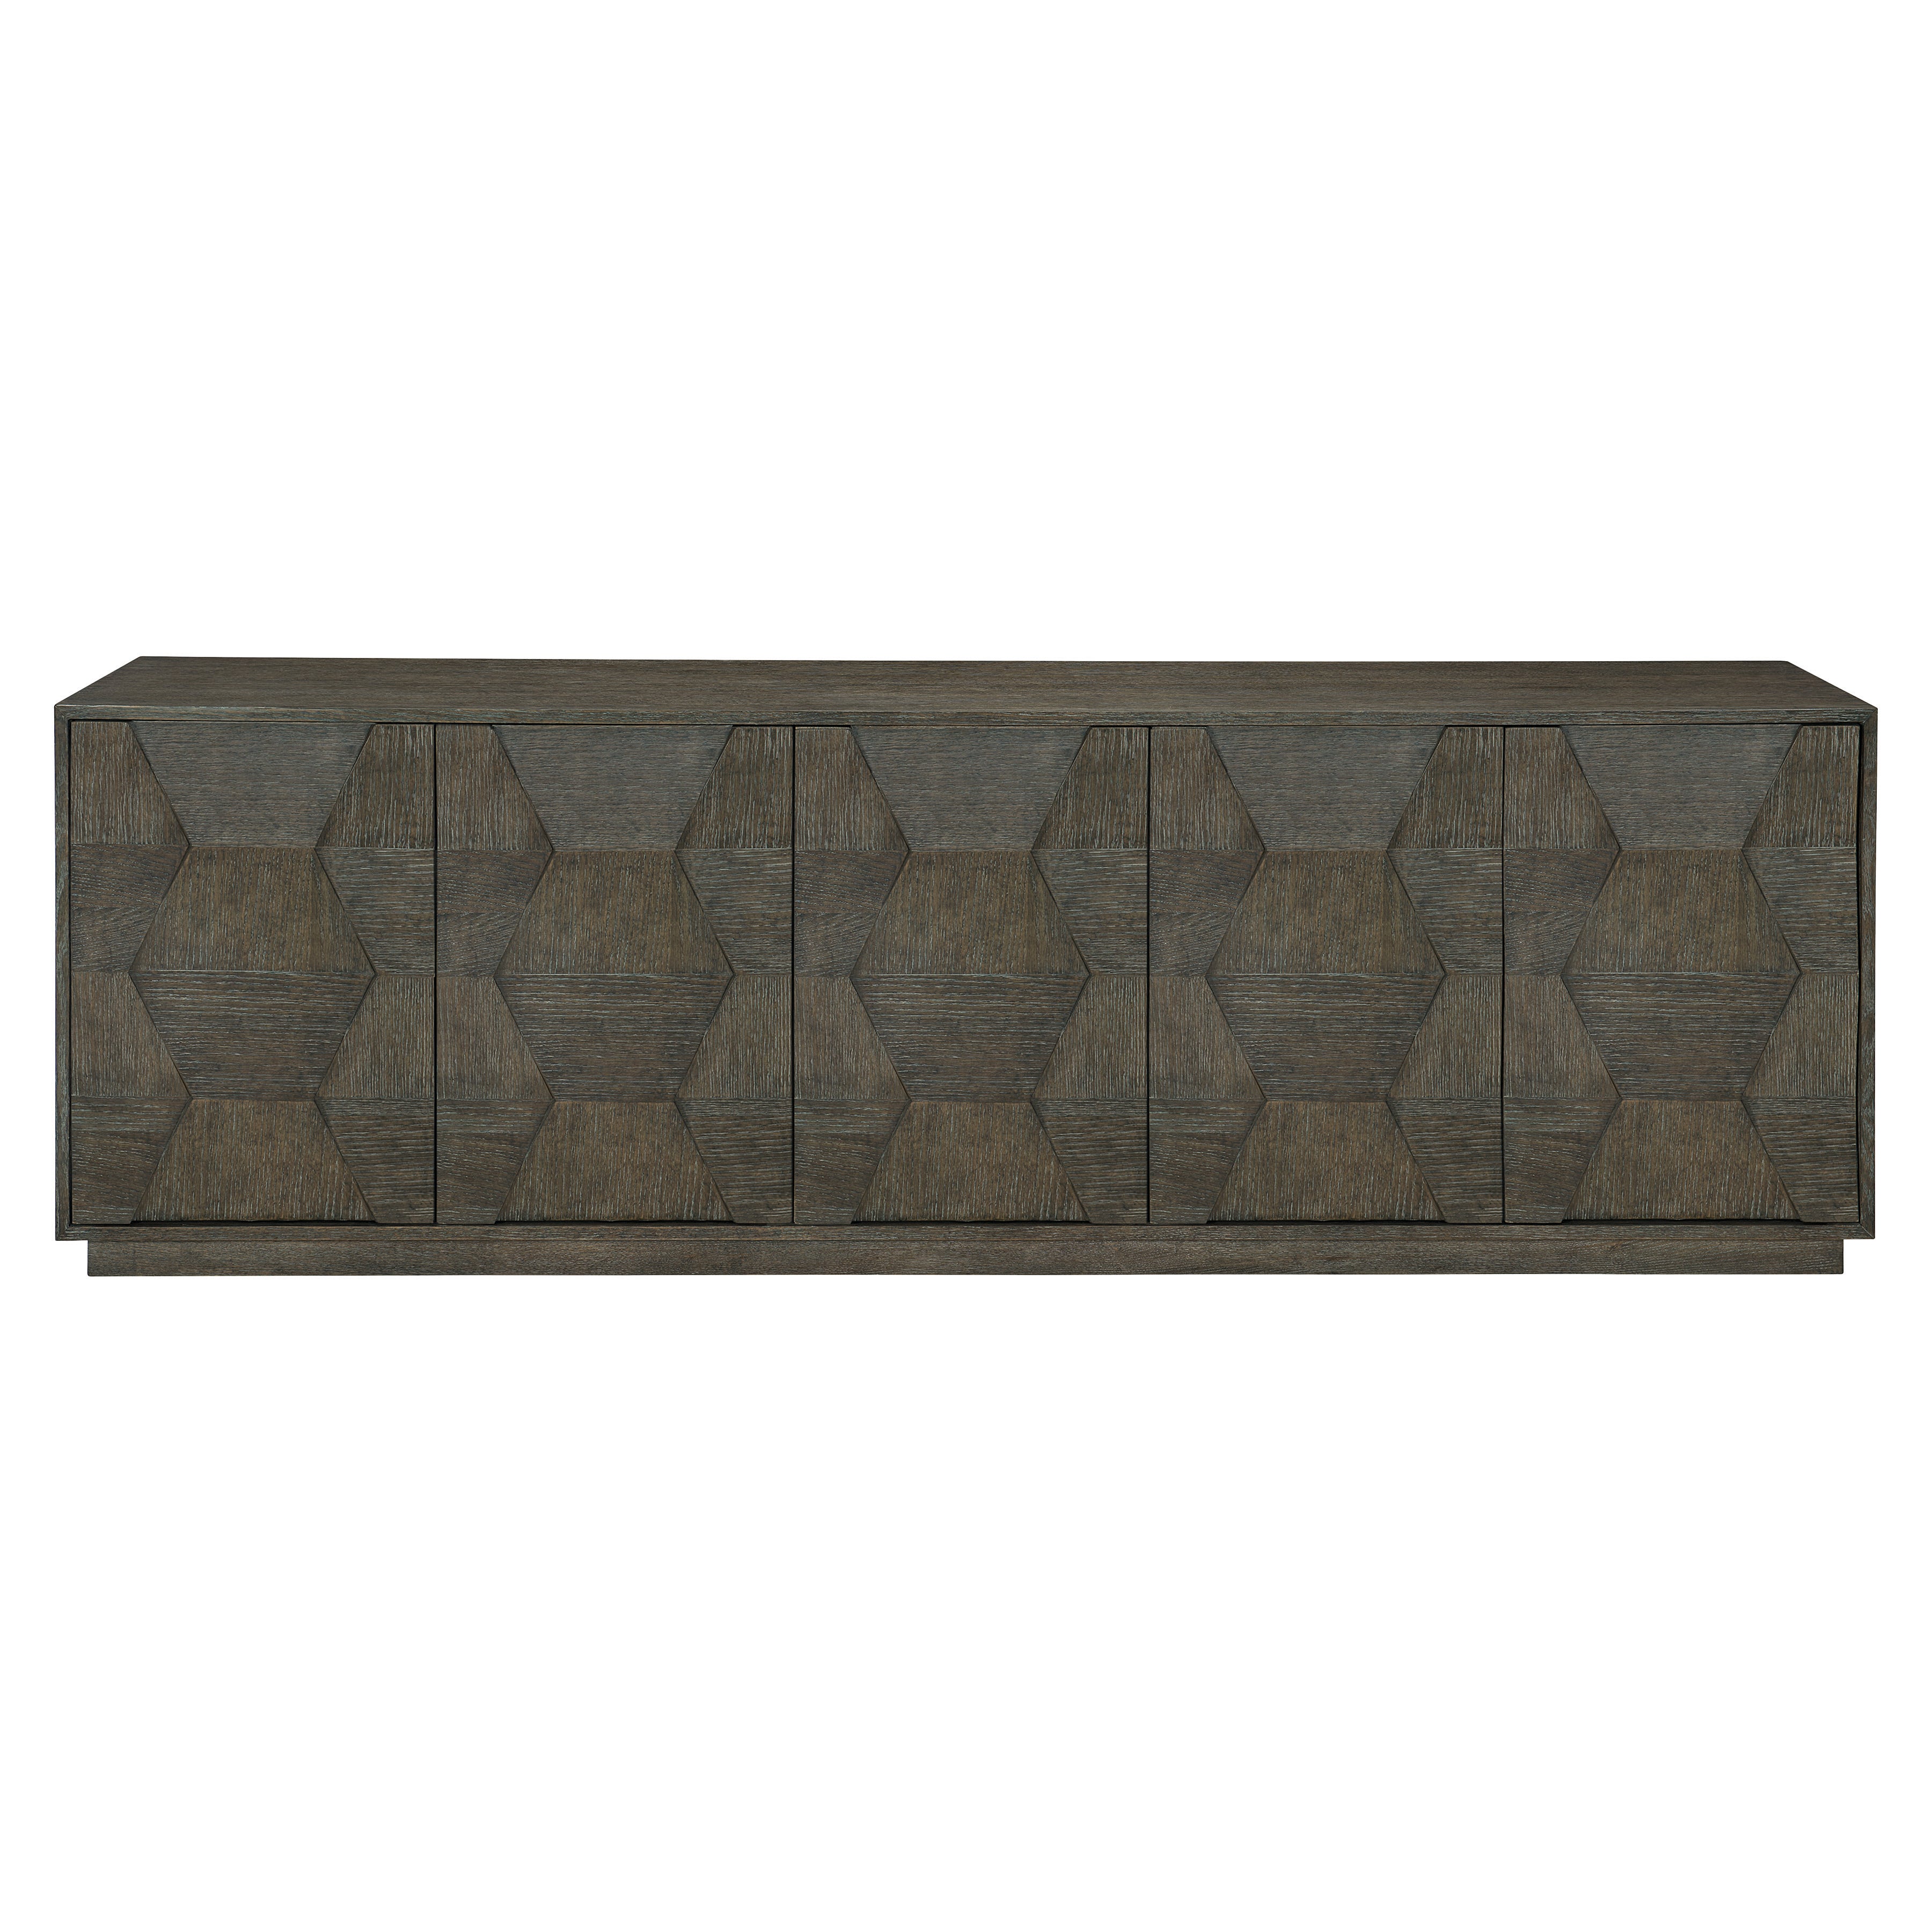 Linea Entertainment Console in Cerused Charcoal Finish